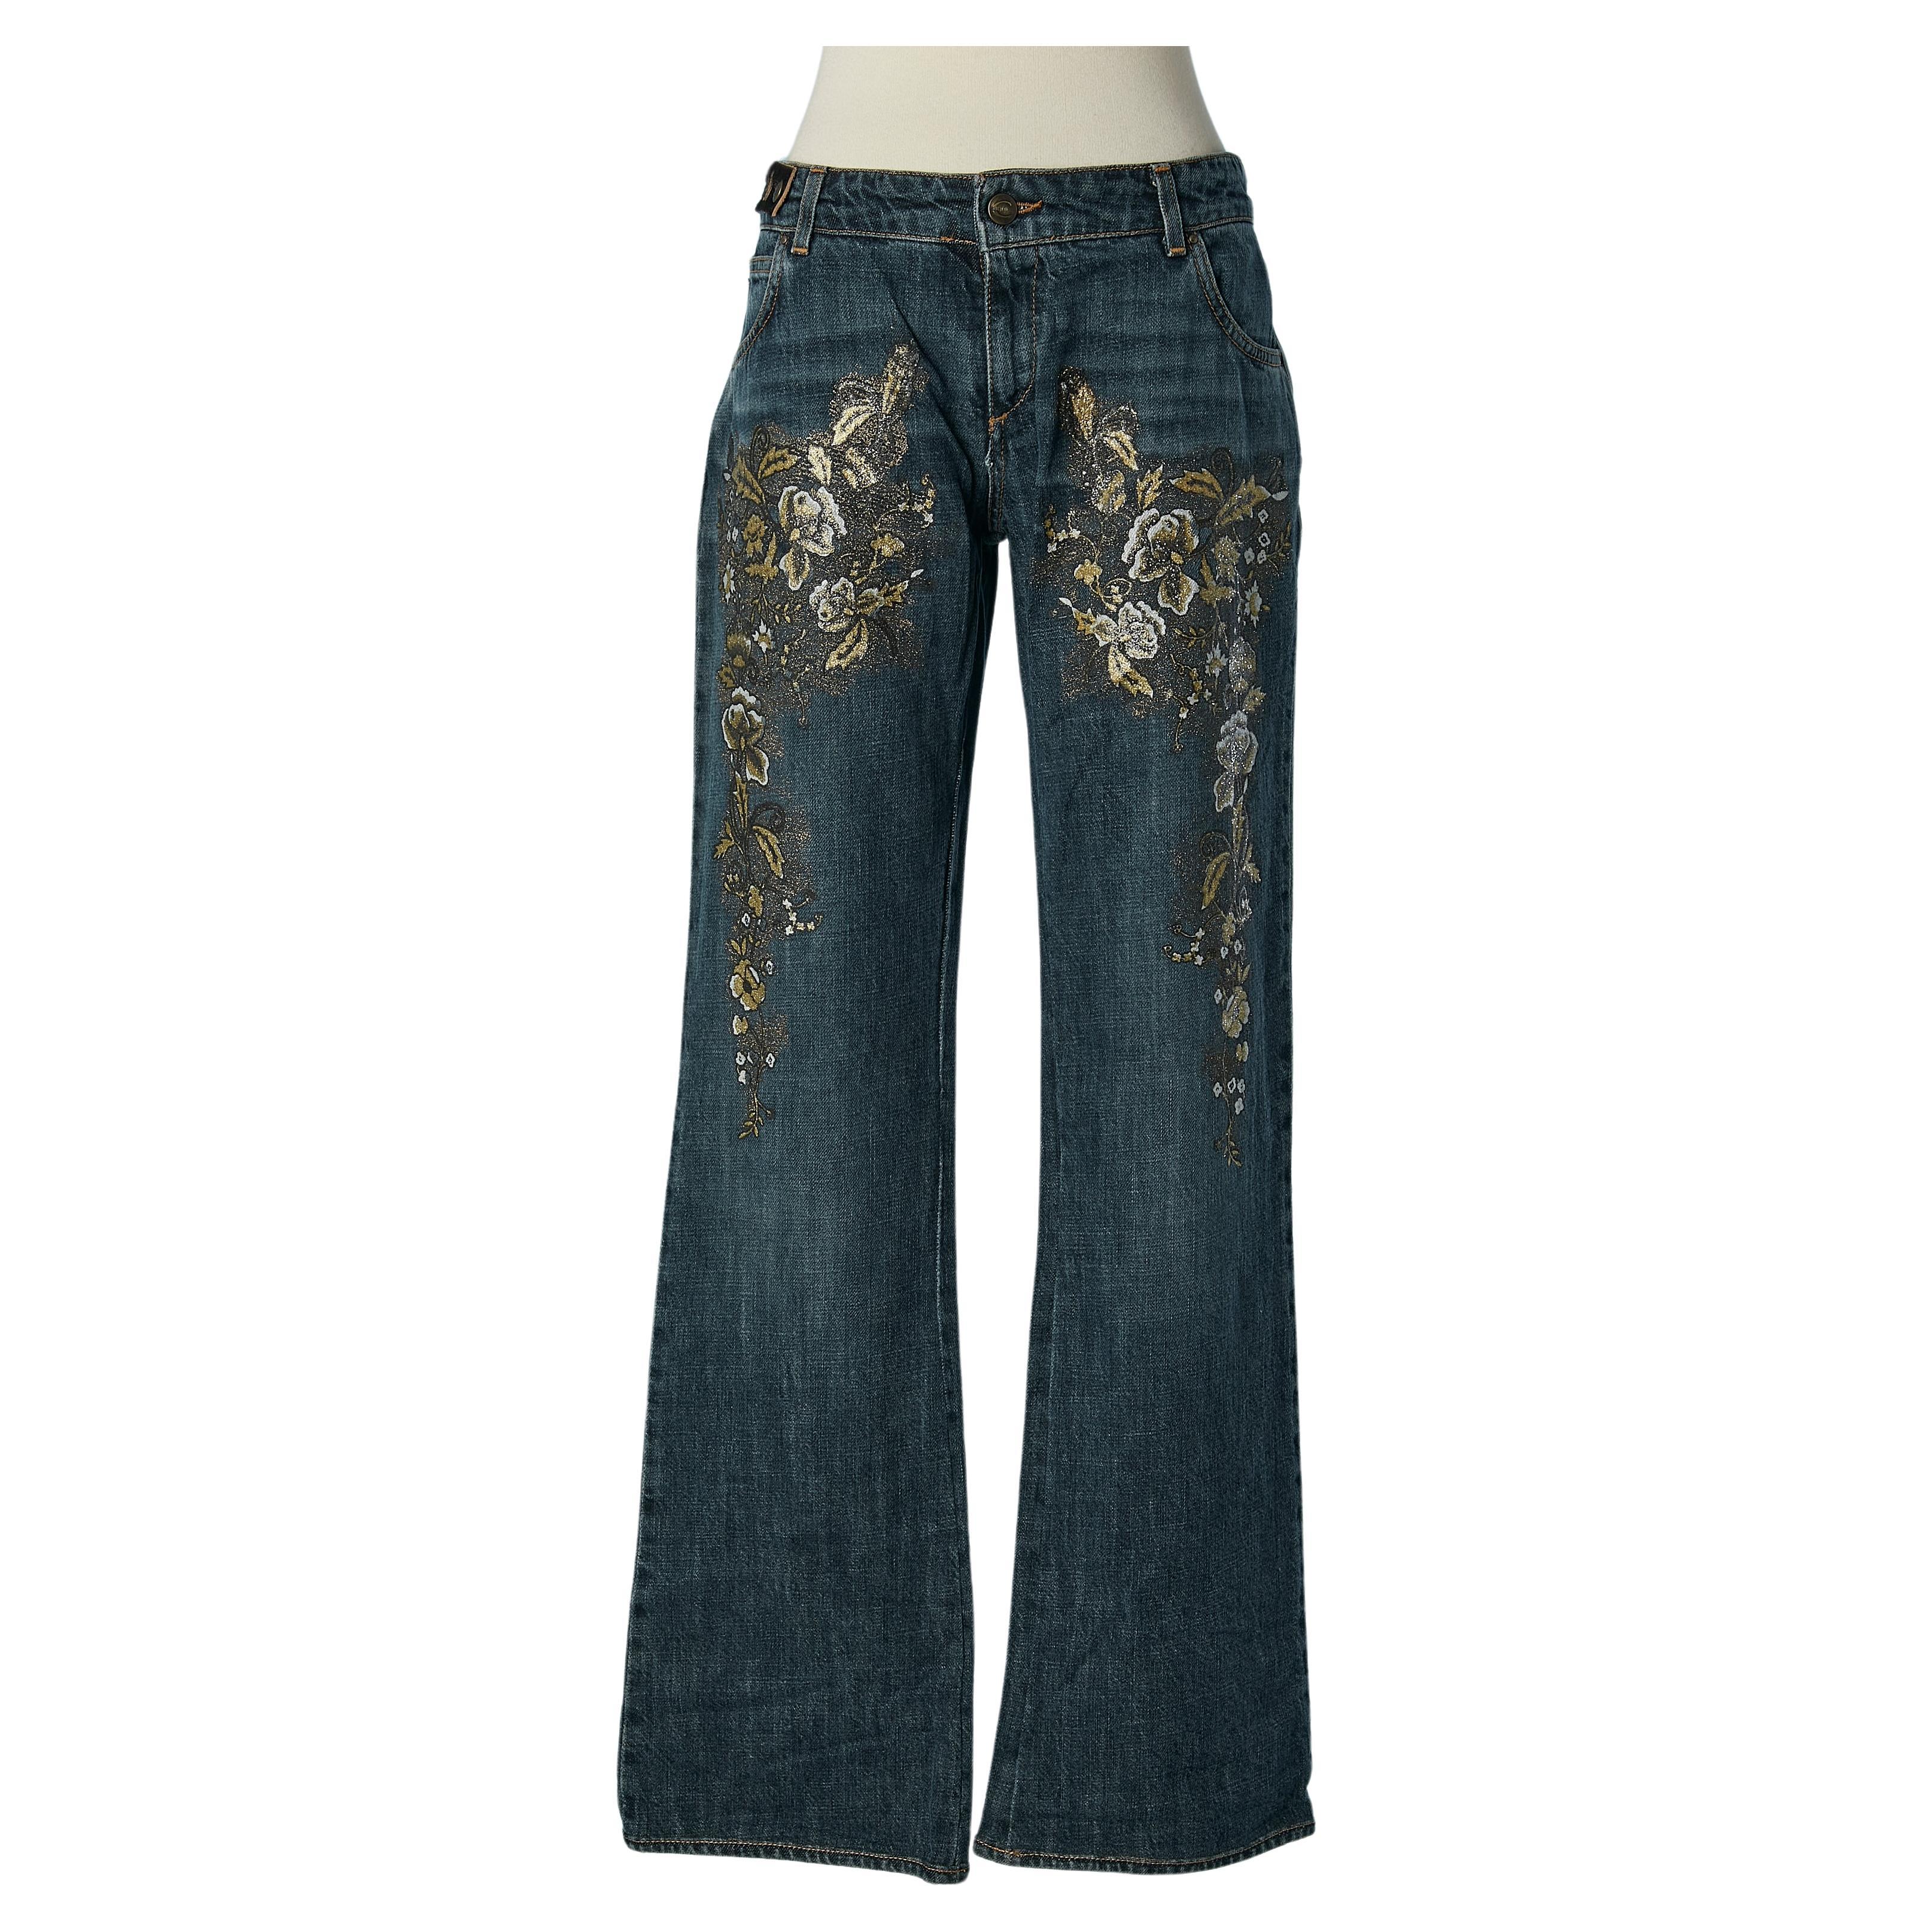 Blue cotton denim jean with flowers glitters pattern Just Cavalli  For Sale